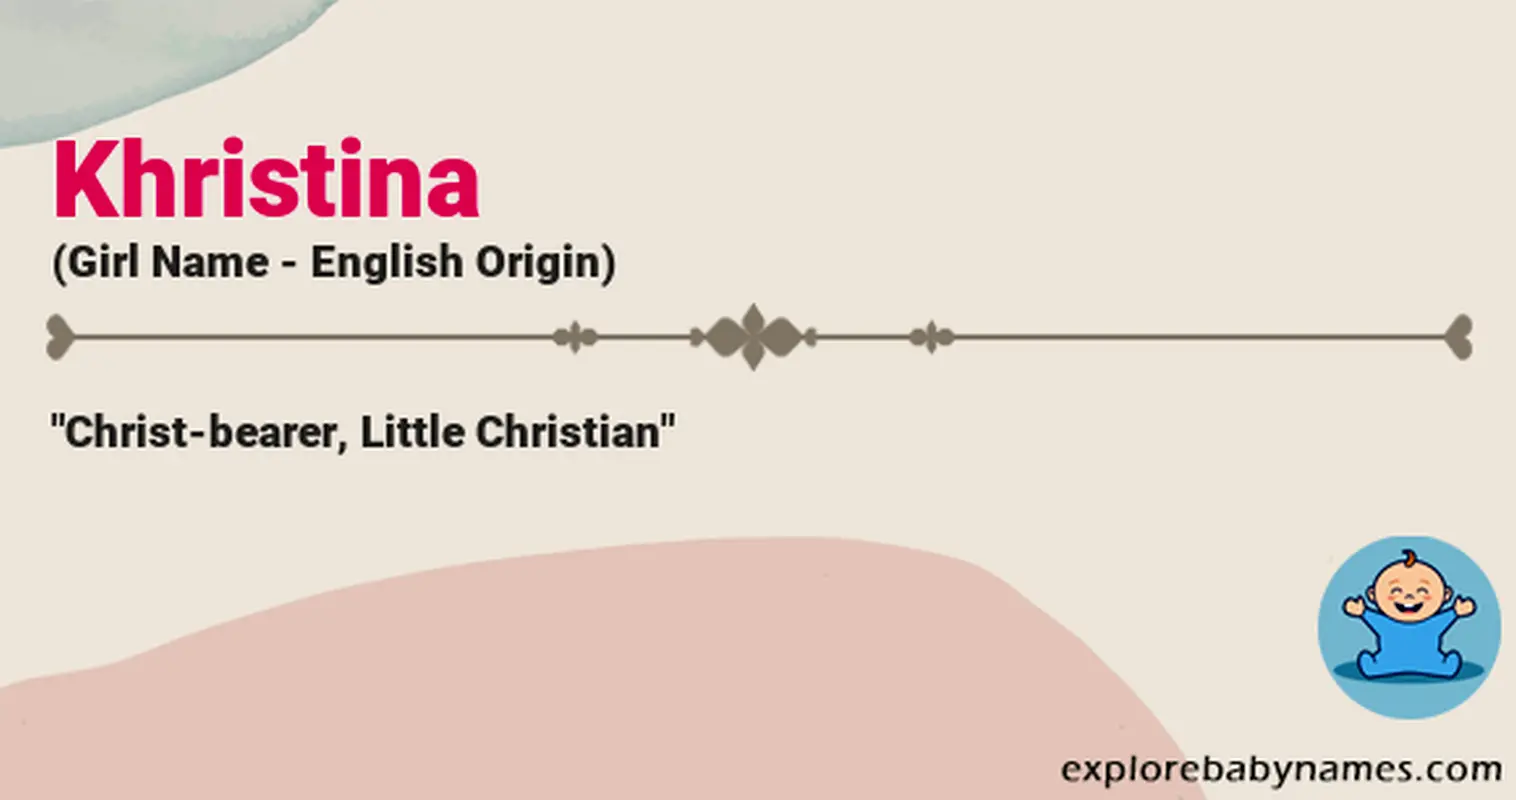 Meaning of Khristina